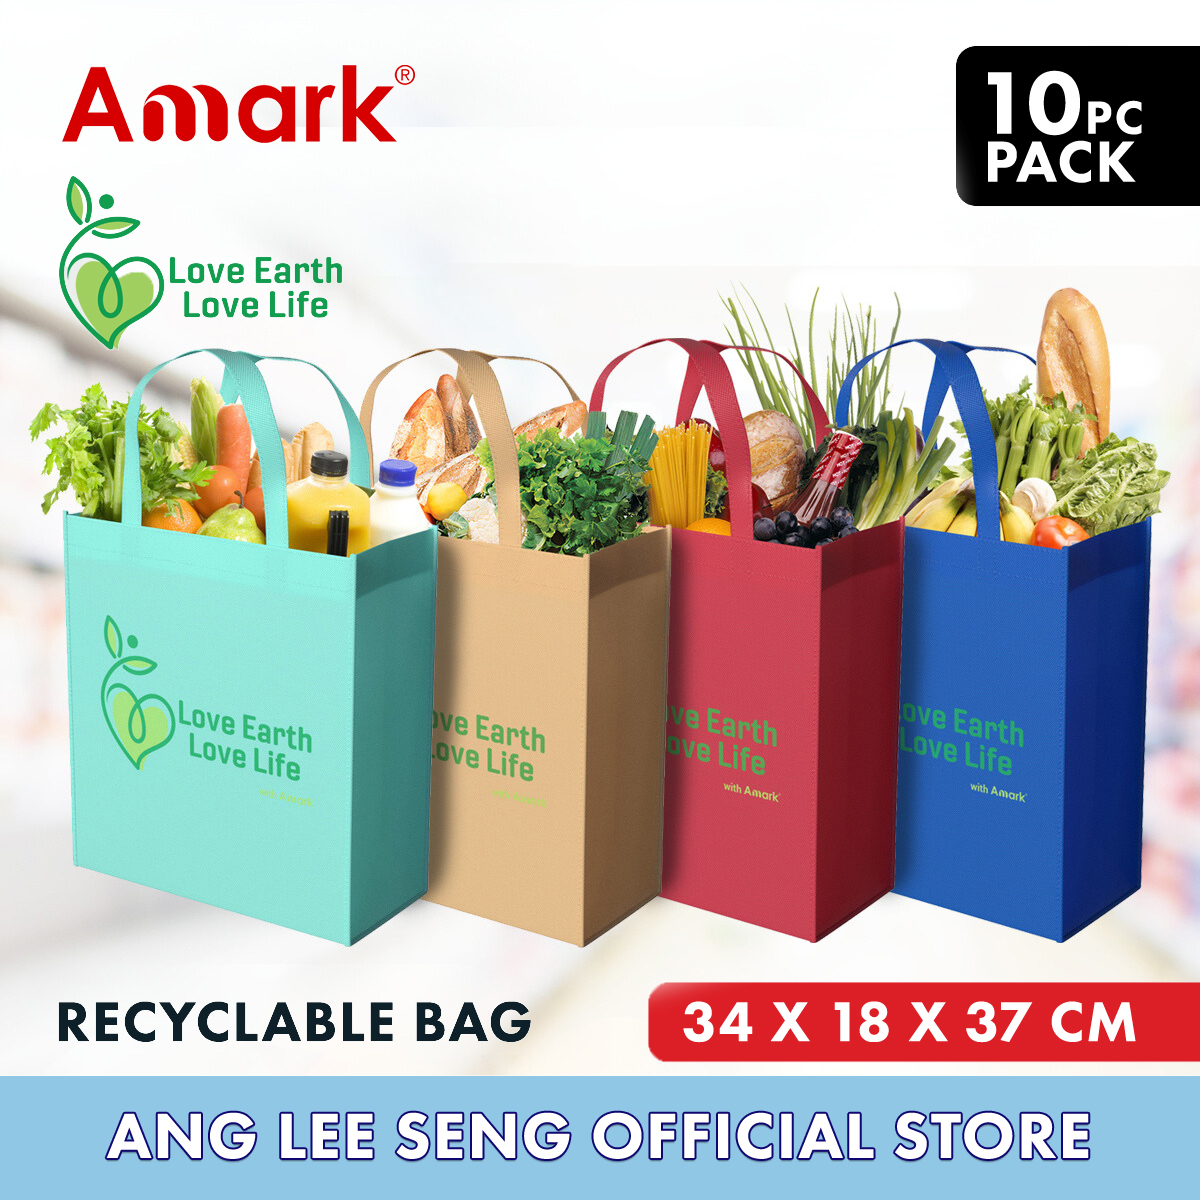 Amark Love Earth Love Life Recyclable Bag 10pc Pack